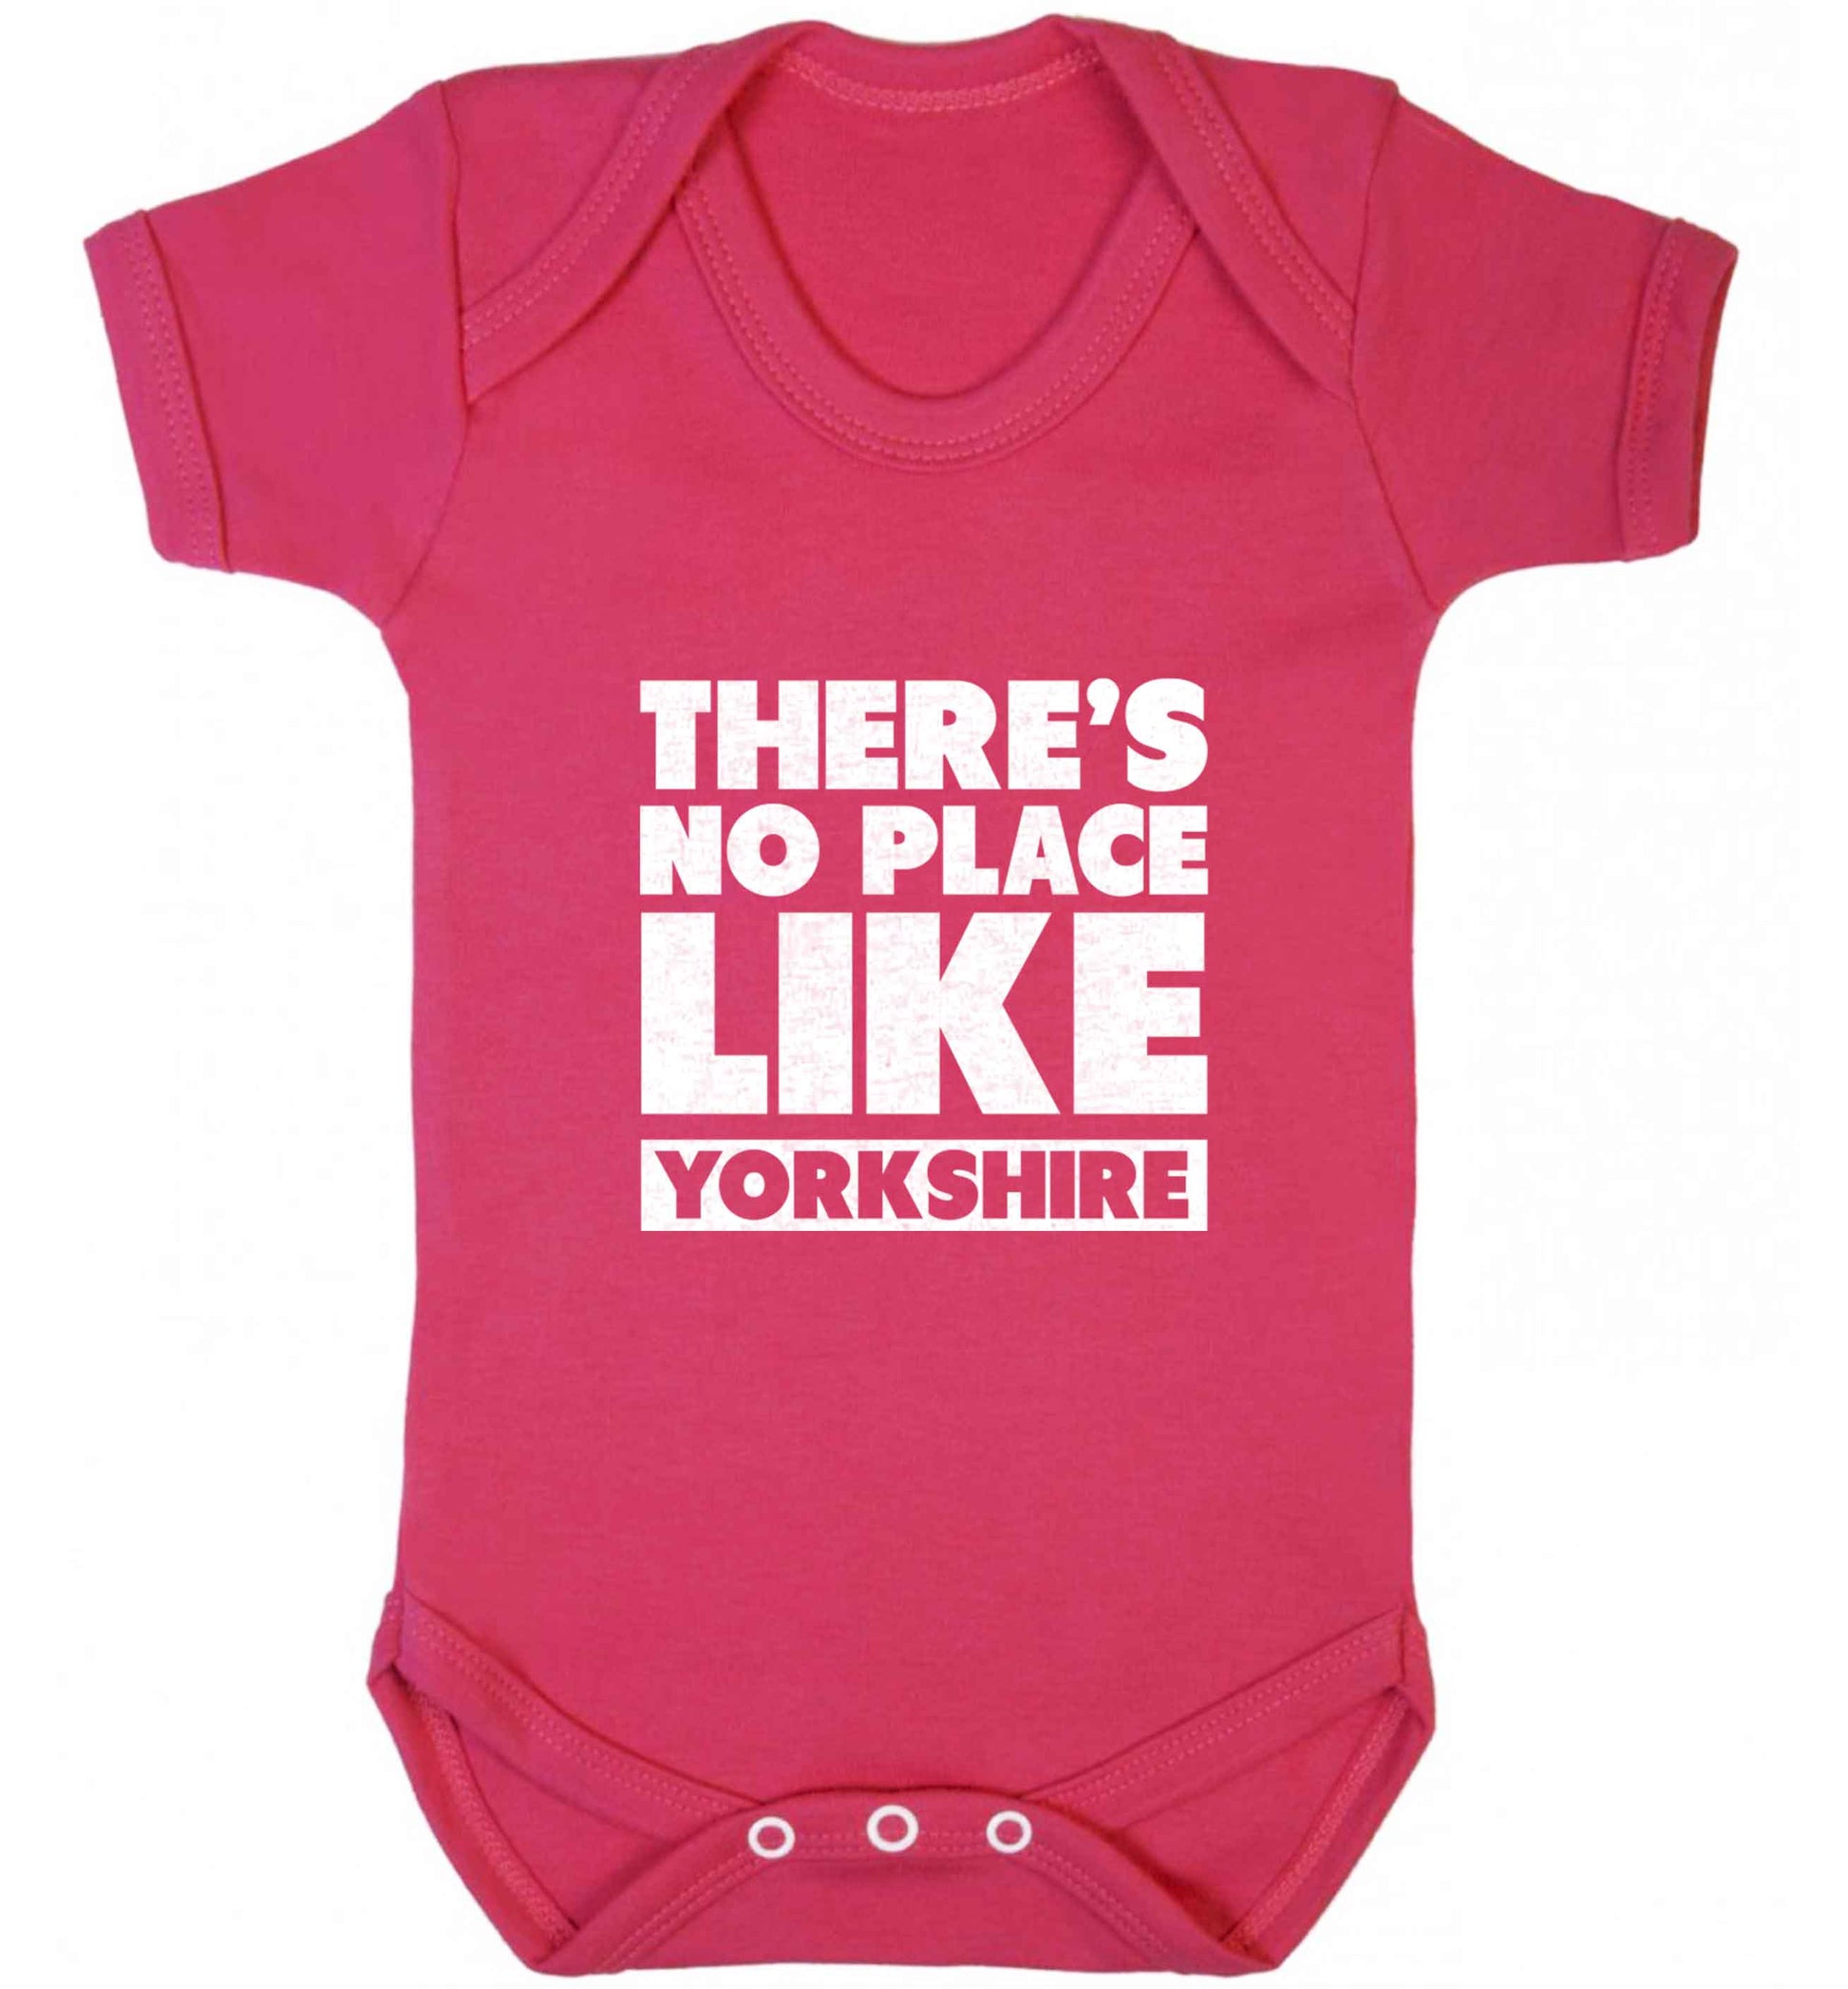 There's no place like Yorkshire baby vest dark pink 18-24 months